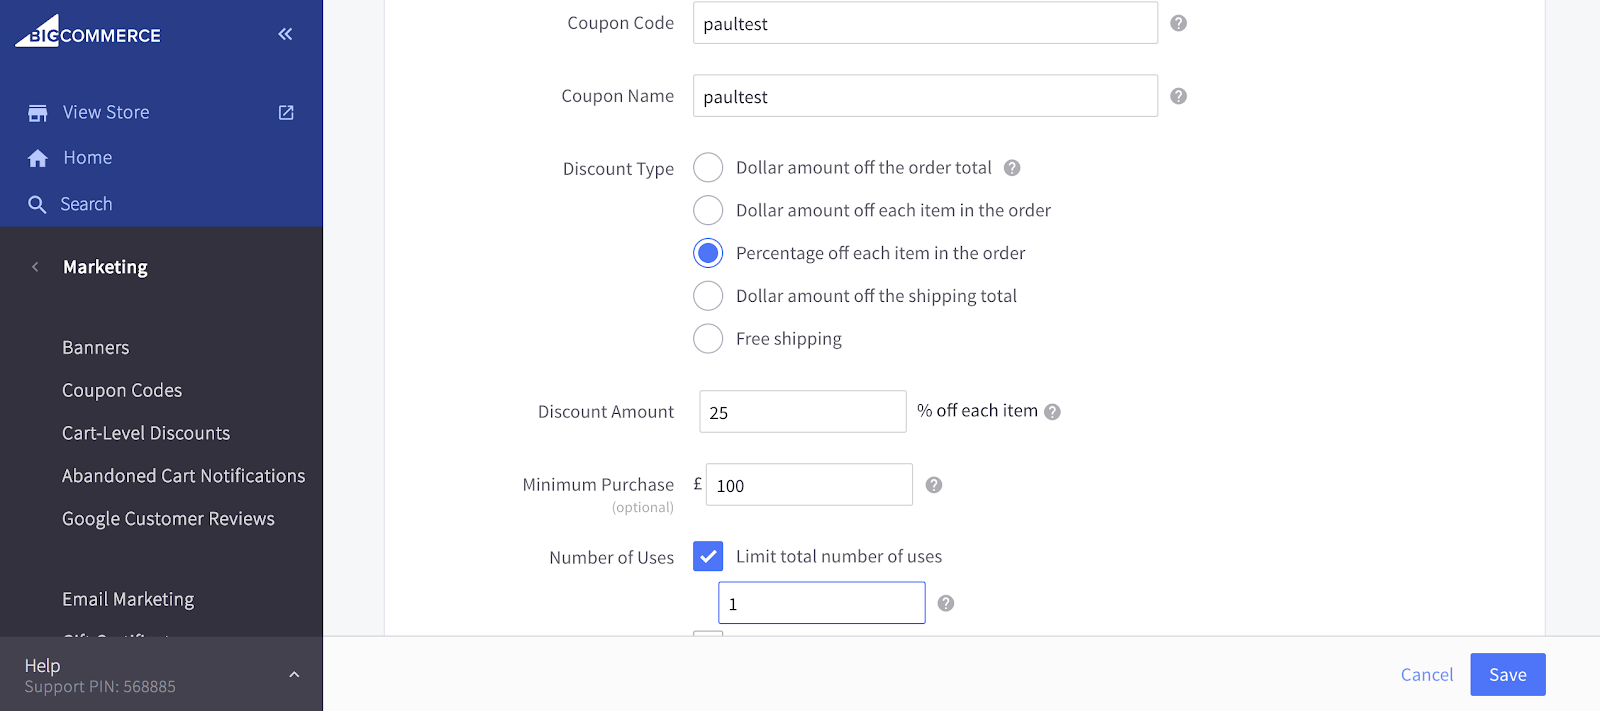 Paul Rogers - BigCommerce Enterprise Review – Introduction to BigCommerce